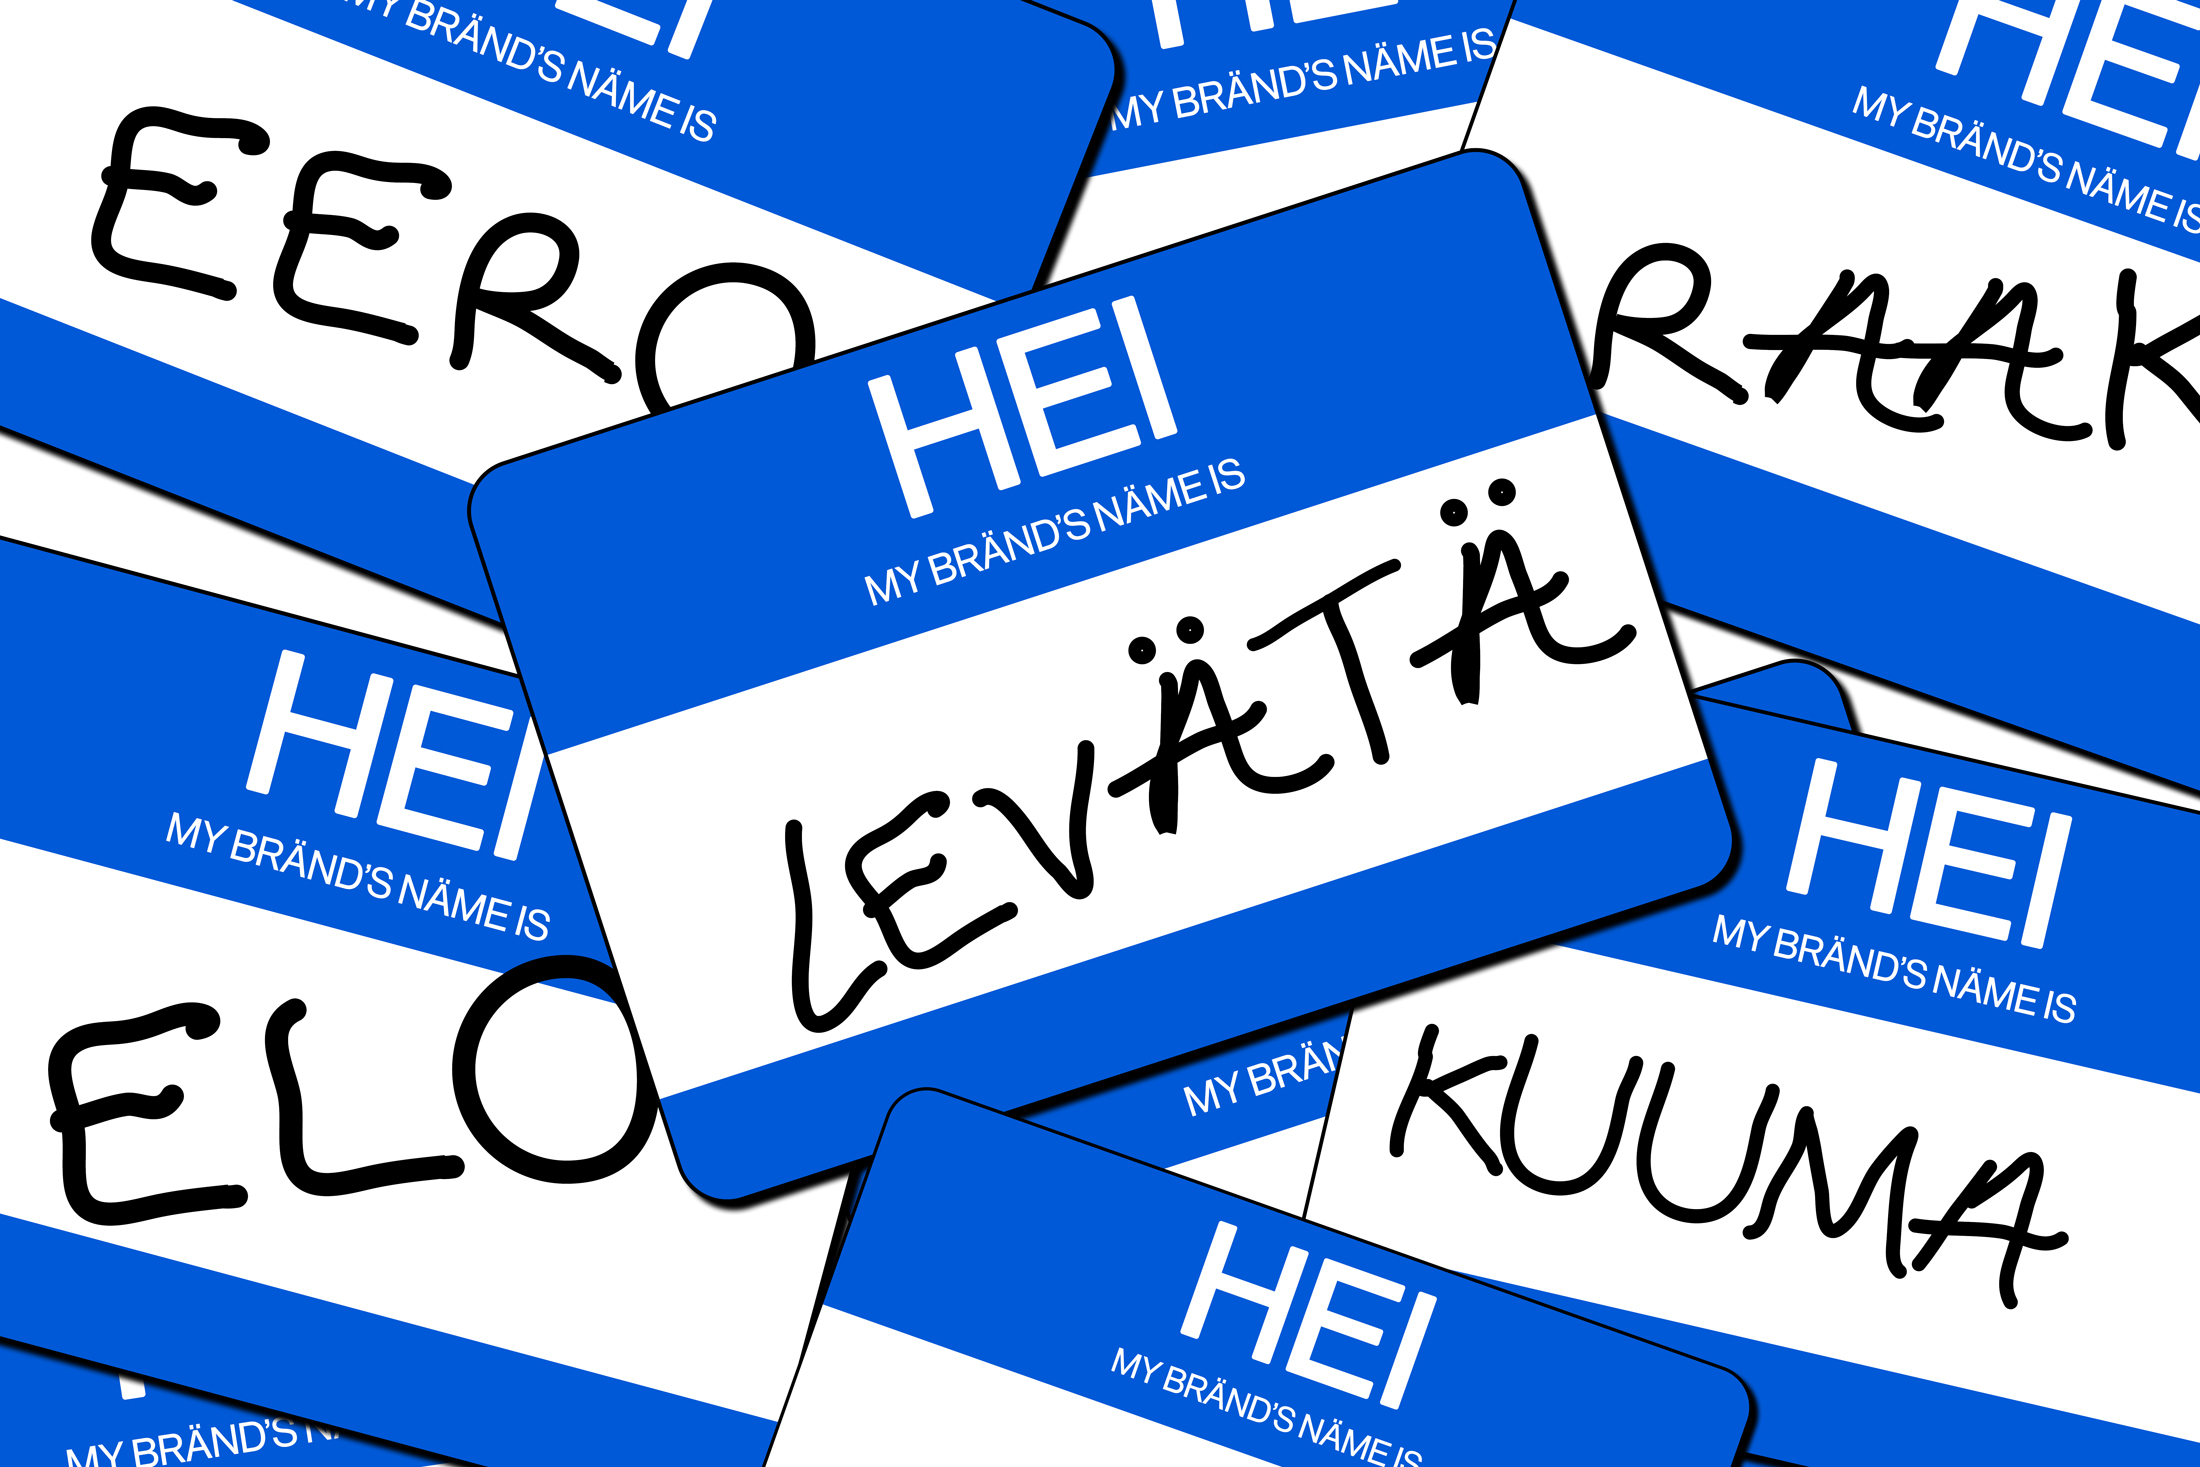 Looking for a Brand Name That Will Stand Out? Try Finnish